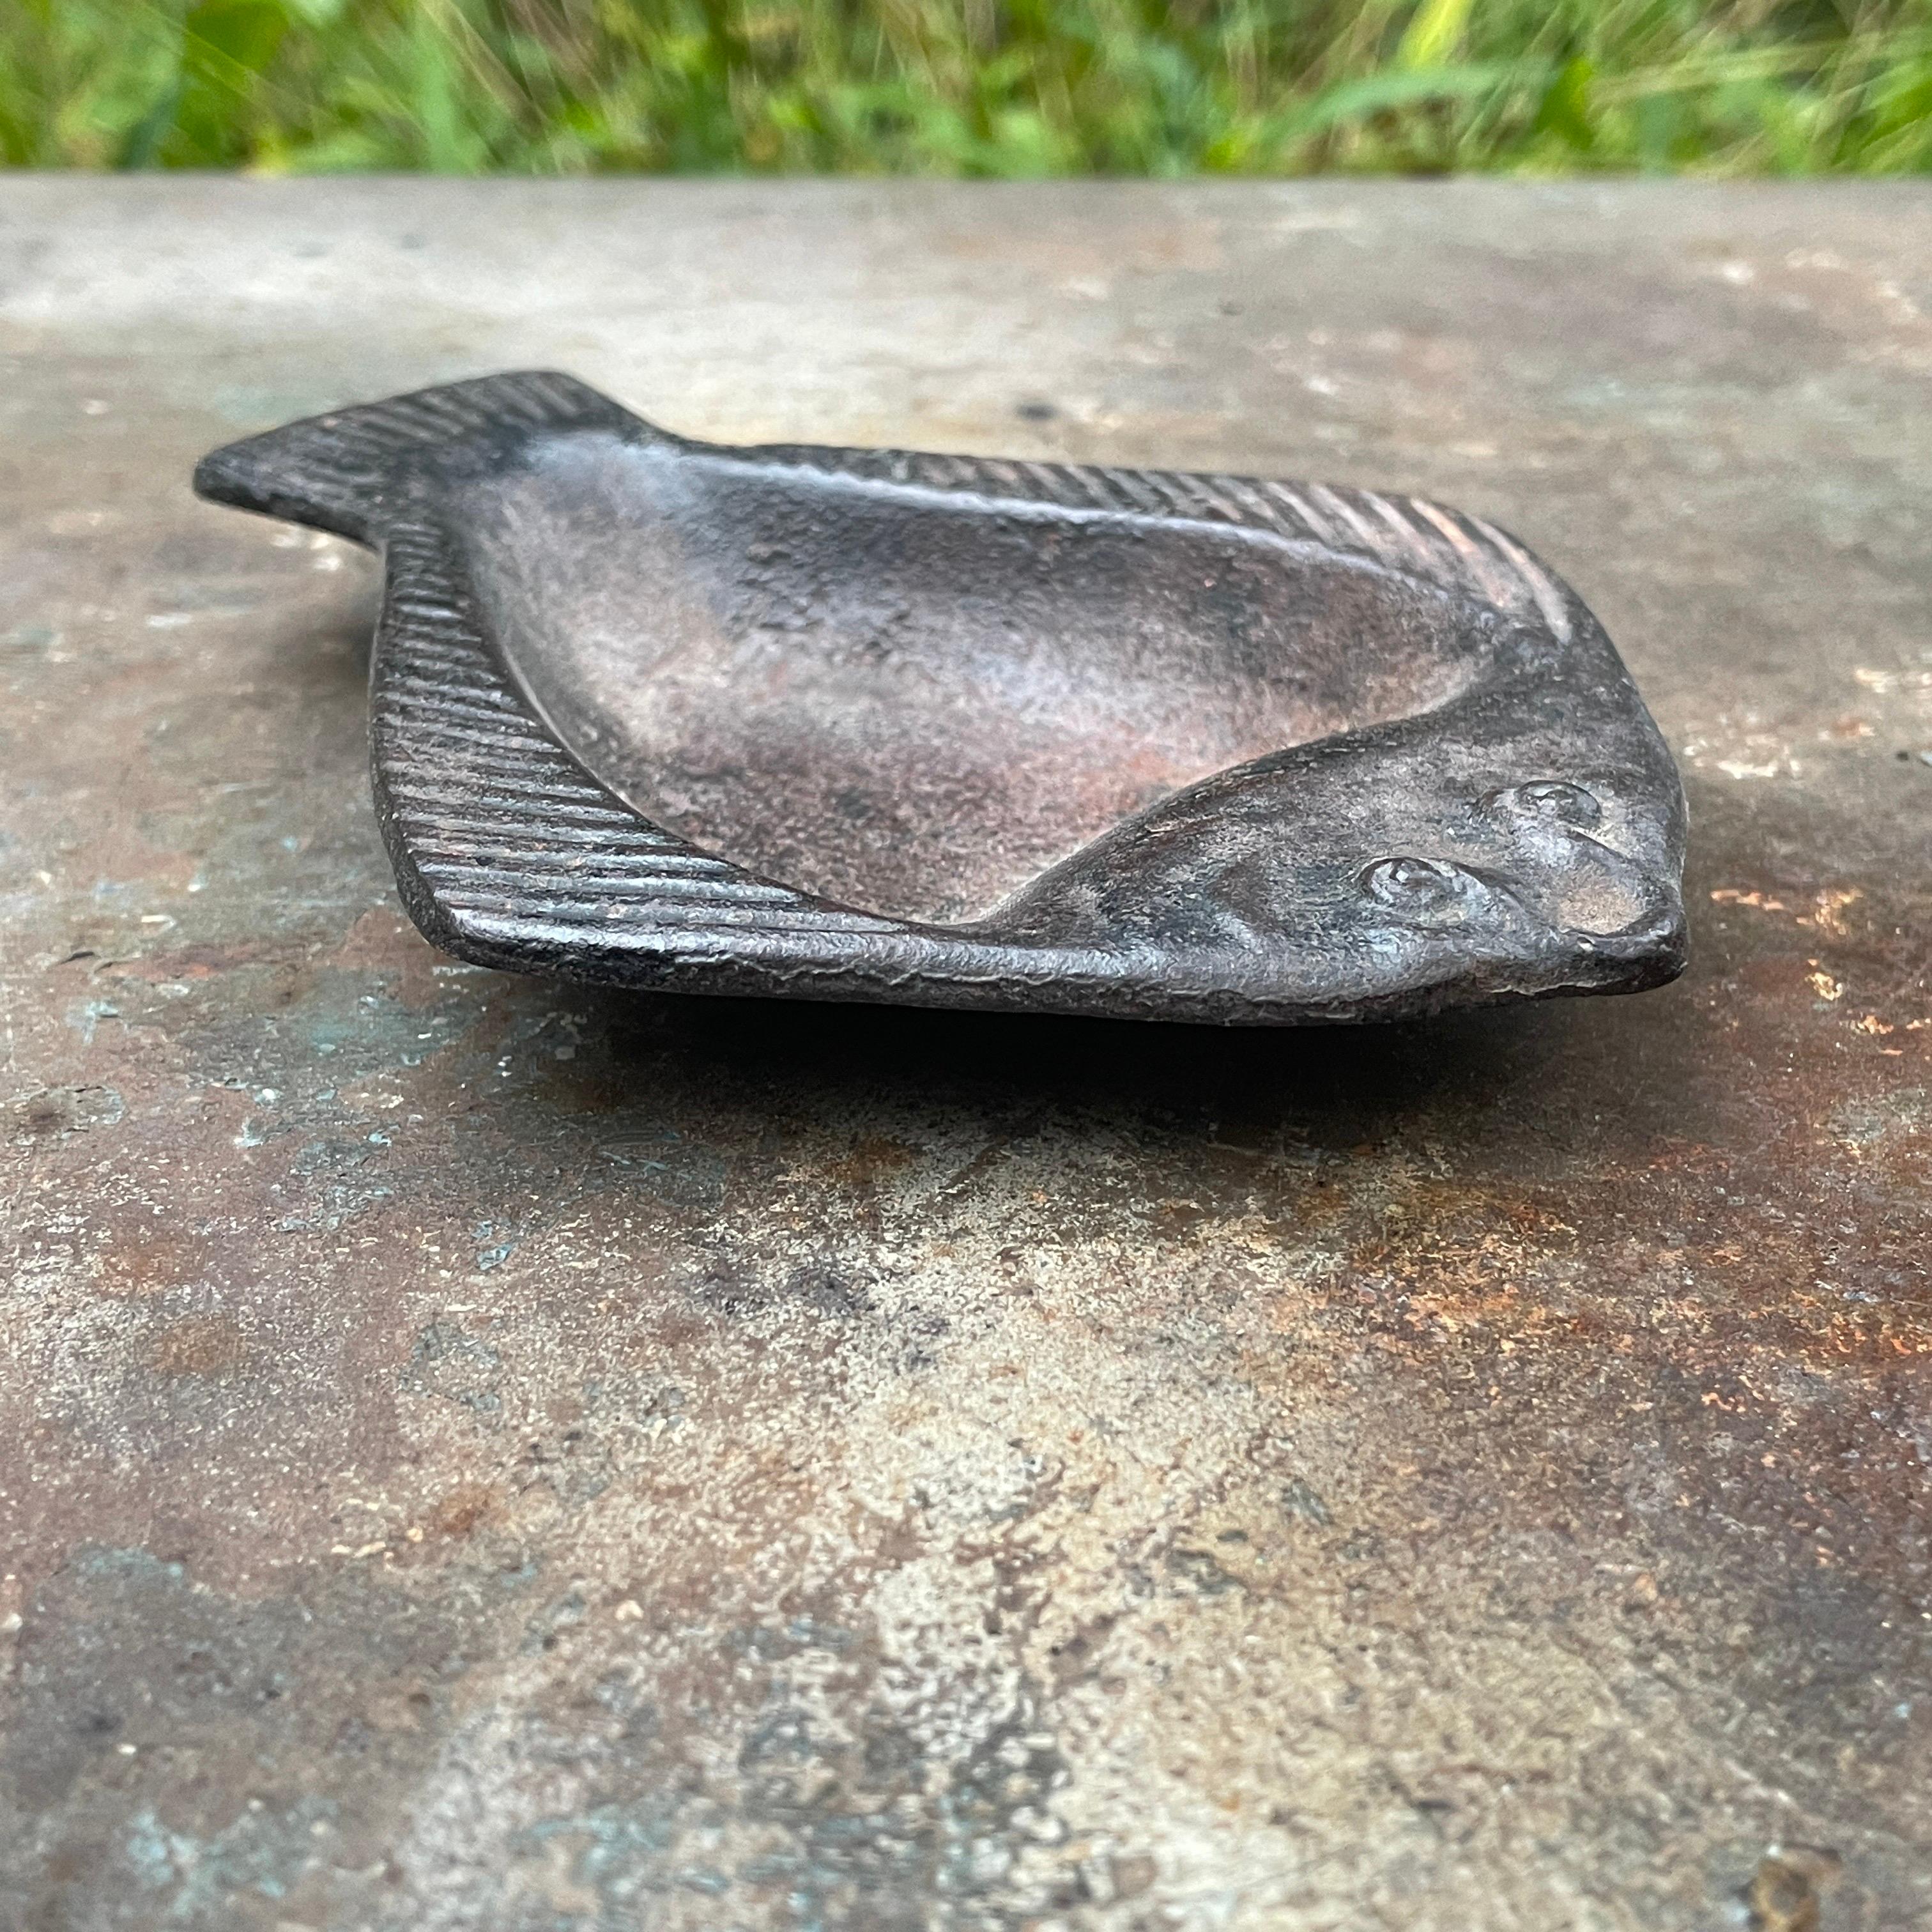 The flounder symbolizes many things among many different cultures; from good luck, to adaptability, to a bringing of change, or new life. Good condition; No chips and no cracks to this thin and highly detailed iron casting, some light oxidation.